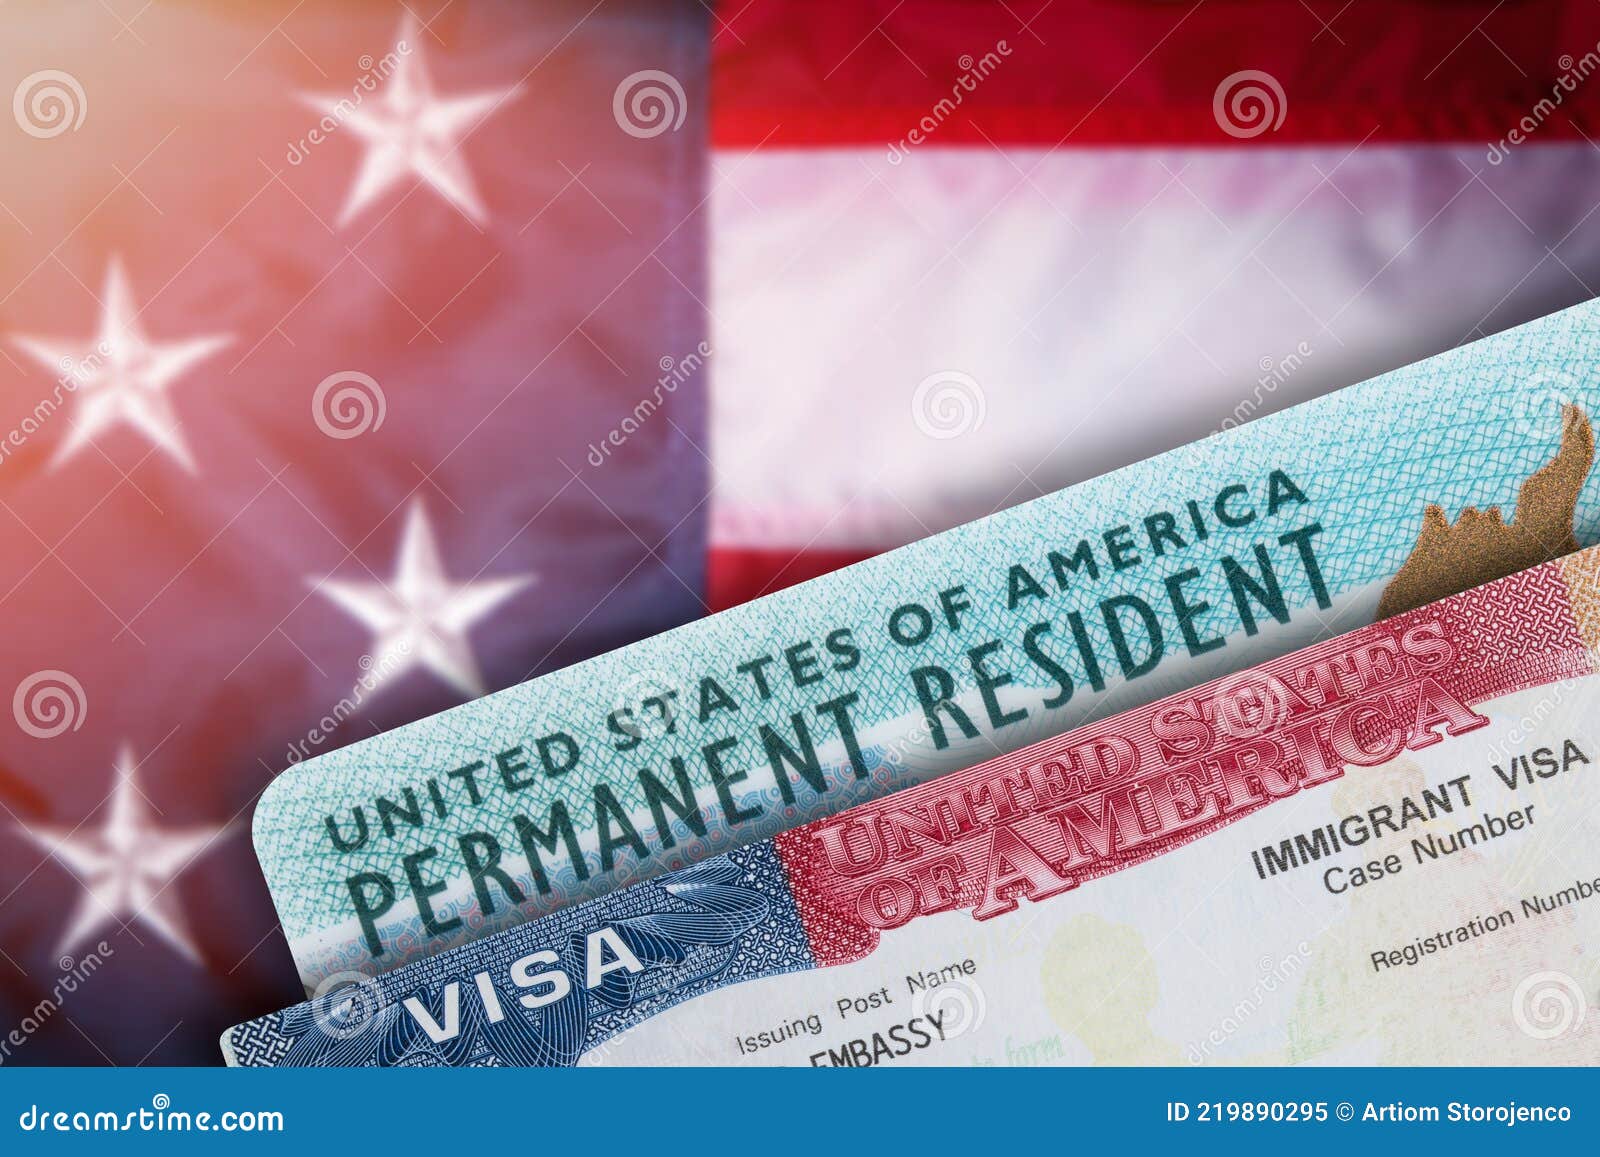 us permanent resident travel to uk